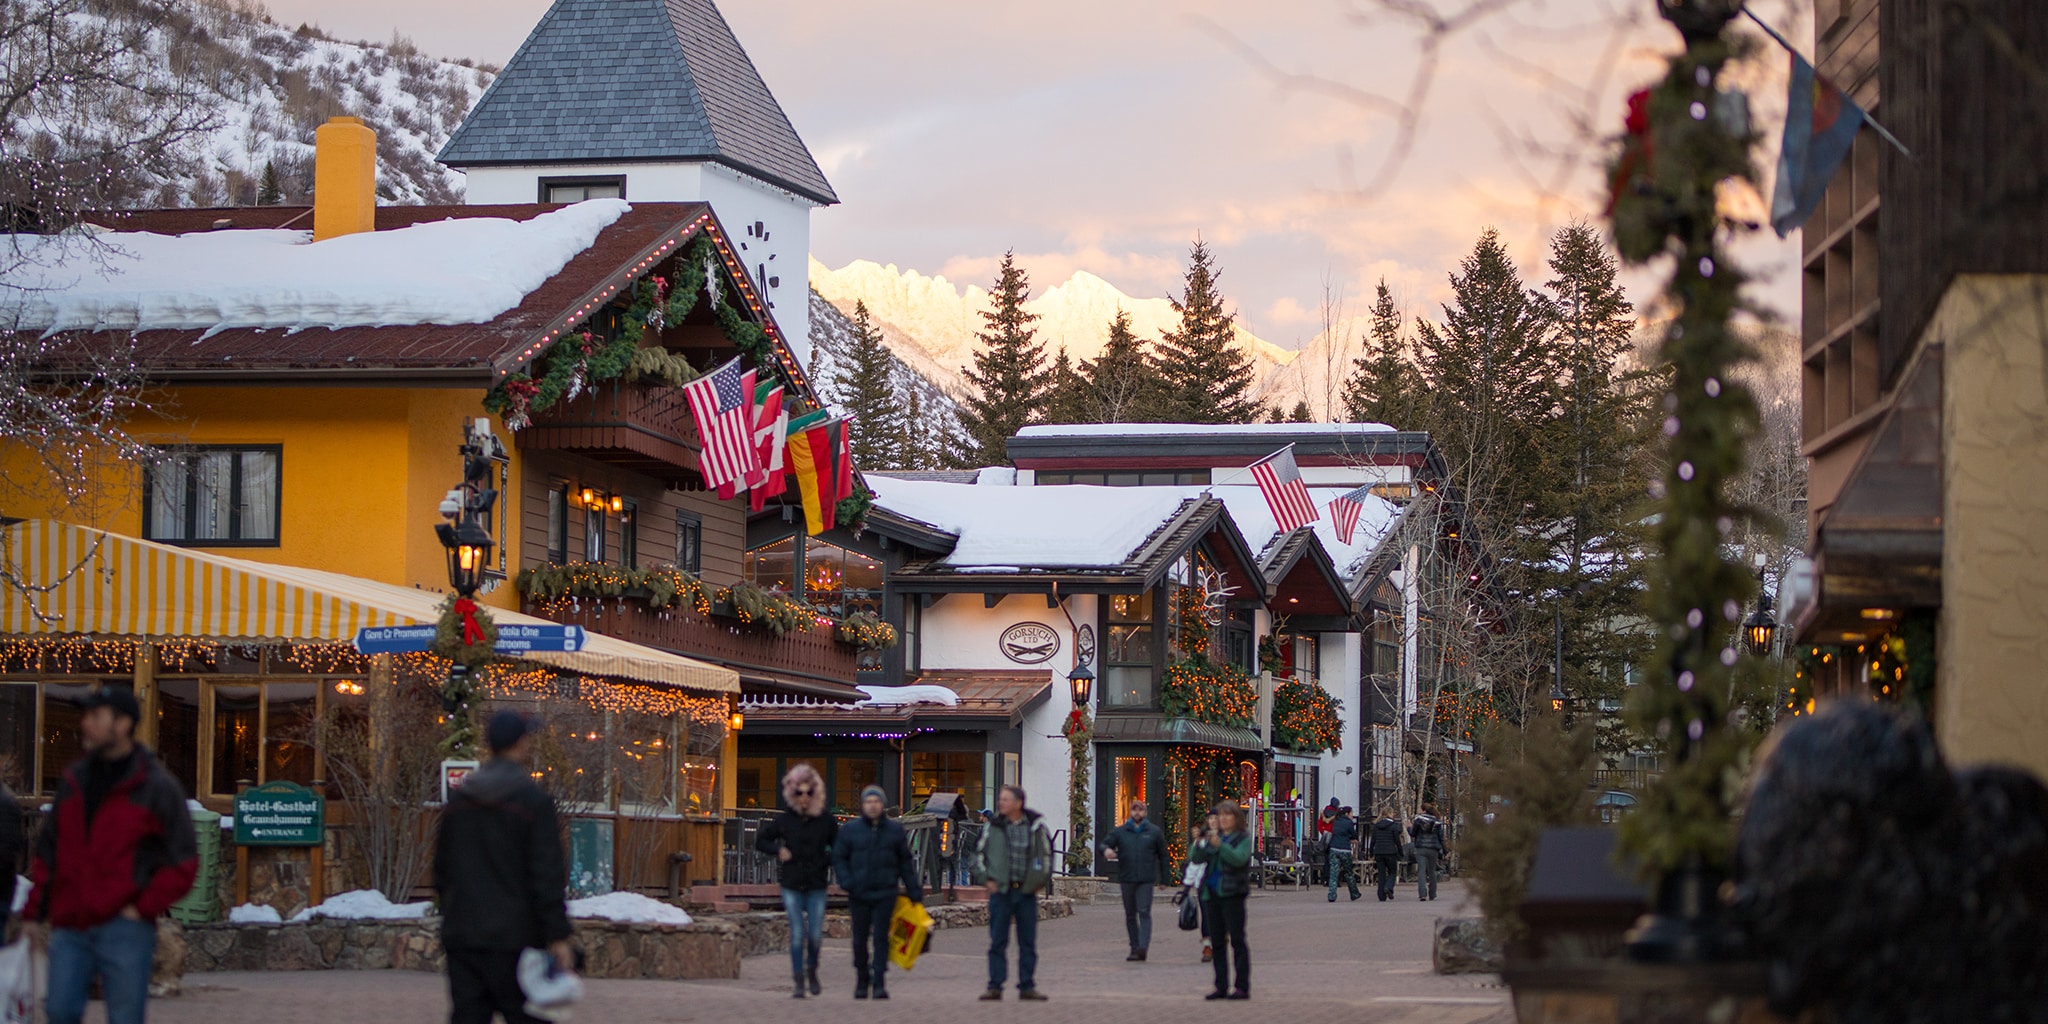 Several people stroll the brick-lined walkways of Vail Village at dusk. Several of the Bavarian-inspired building house shops and have snow-covered roofs.